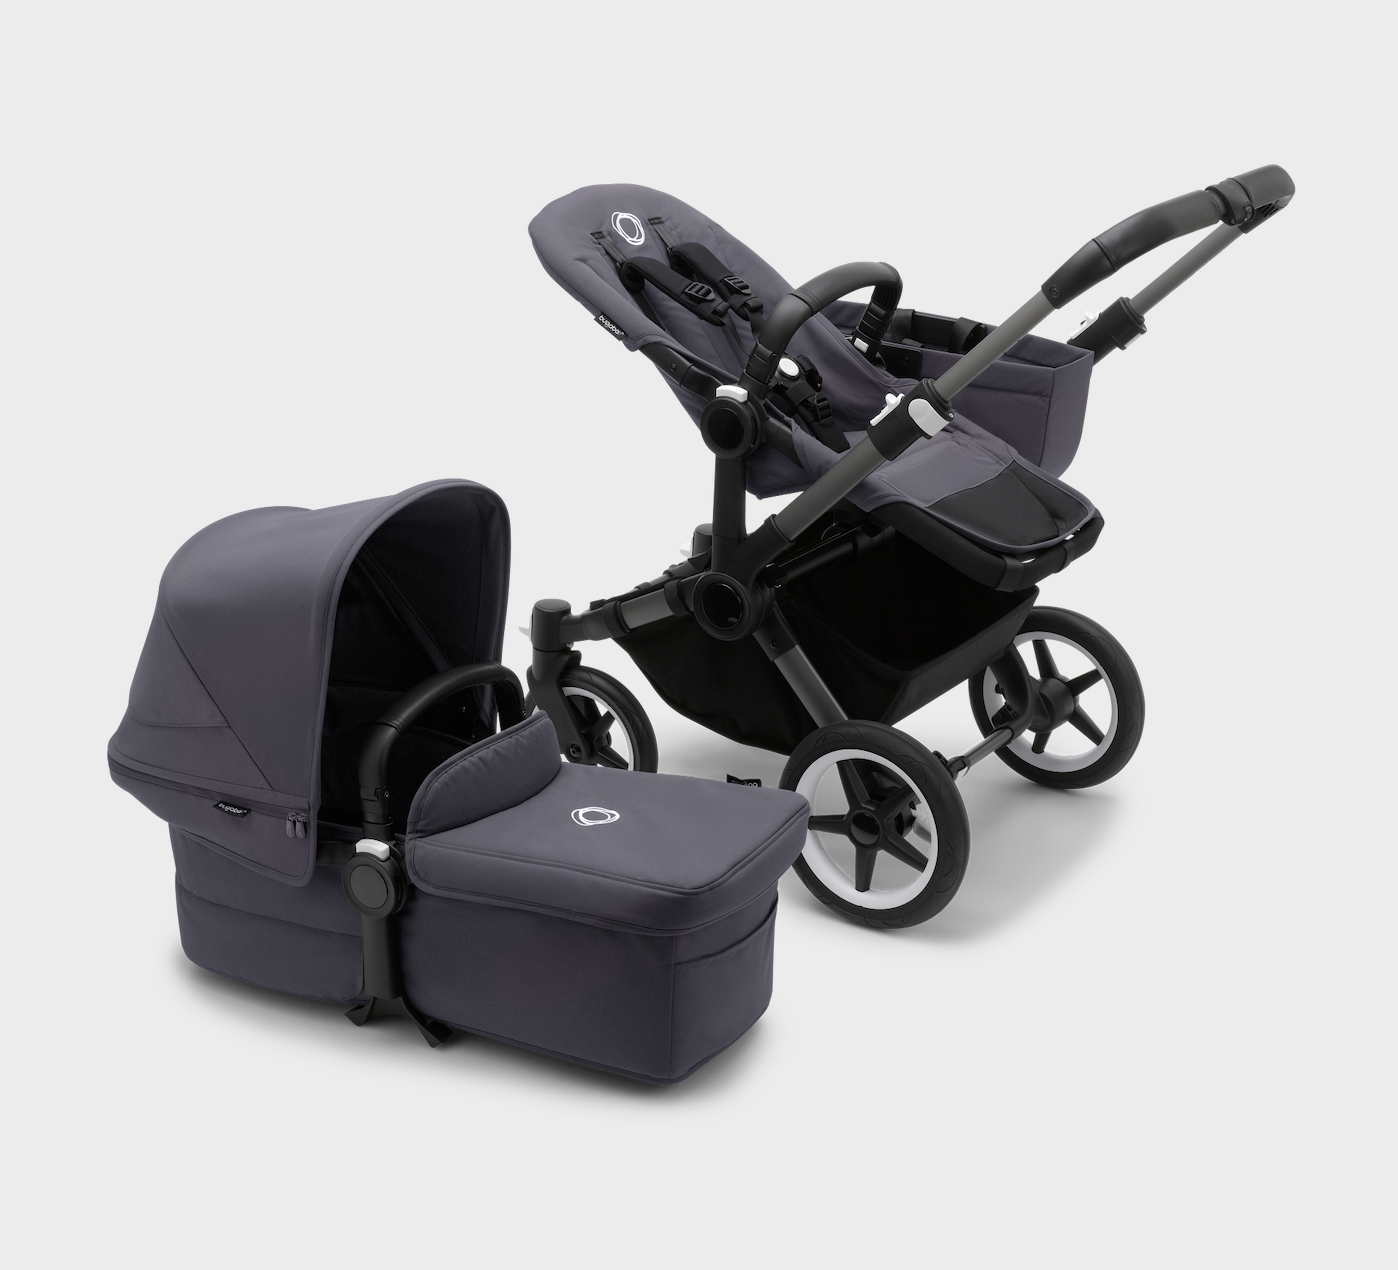 Bugaboo Donkey 5 Duo Pushchair & Carrycot - Graphite / Stormy Blue